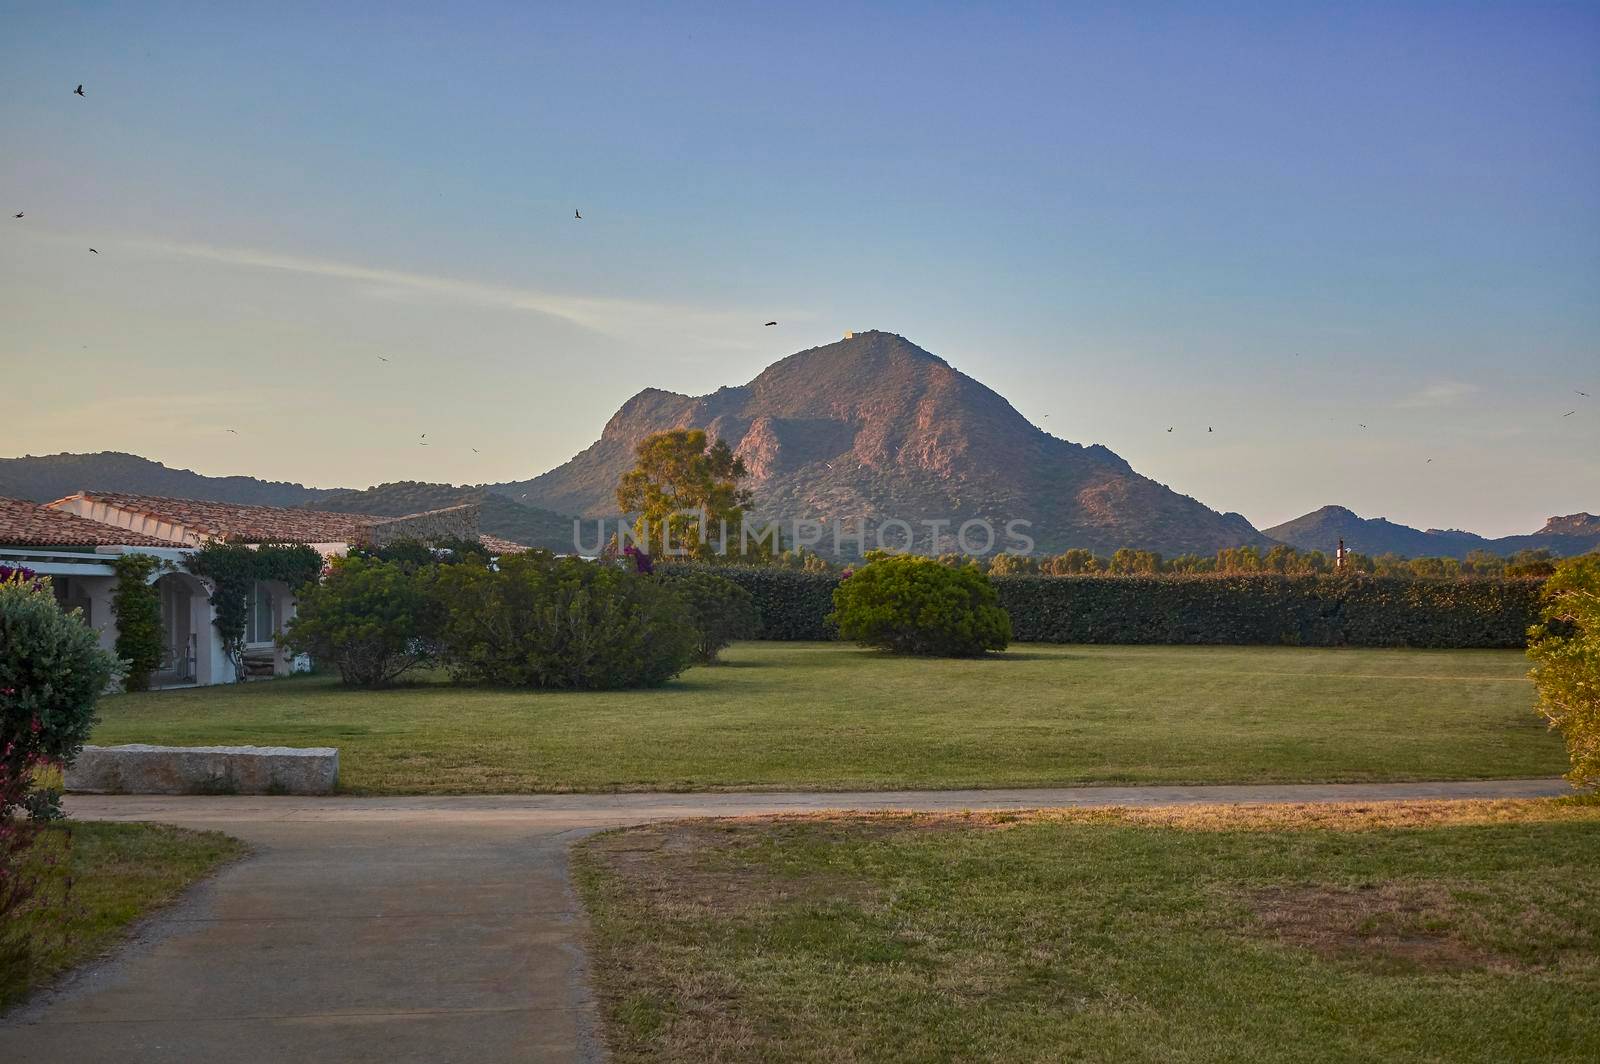 Beautiful garden with a mountain in the background and a path that crosses it: a paradise surrounded by nature in which to relax and enjoy the surrounding landscape.